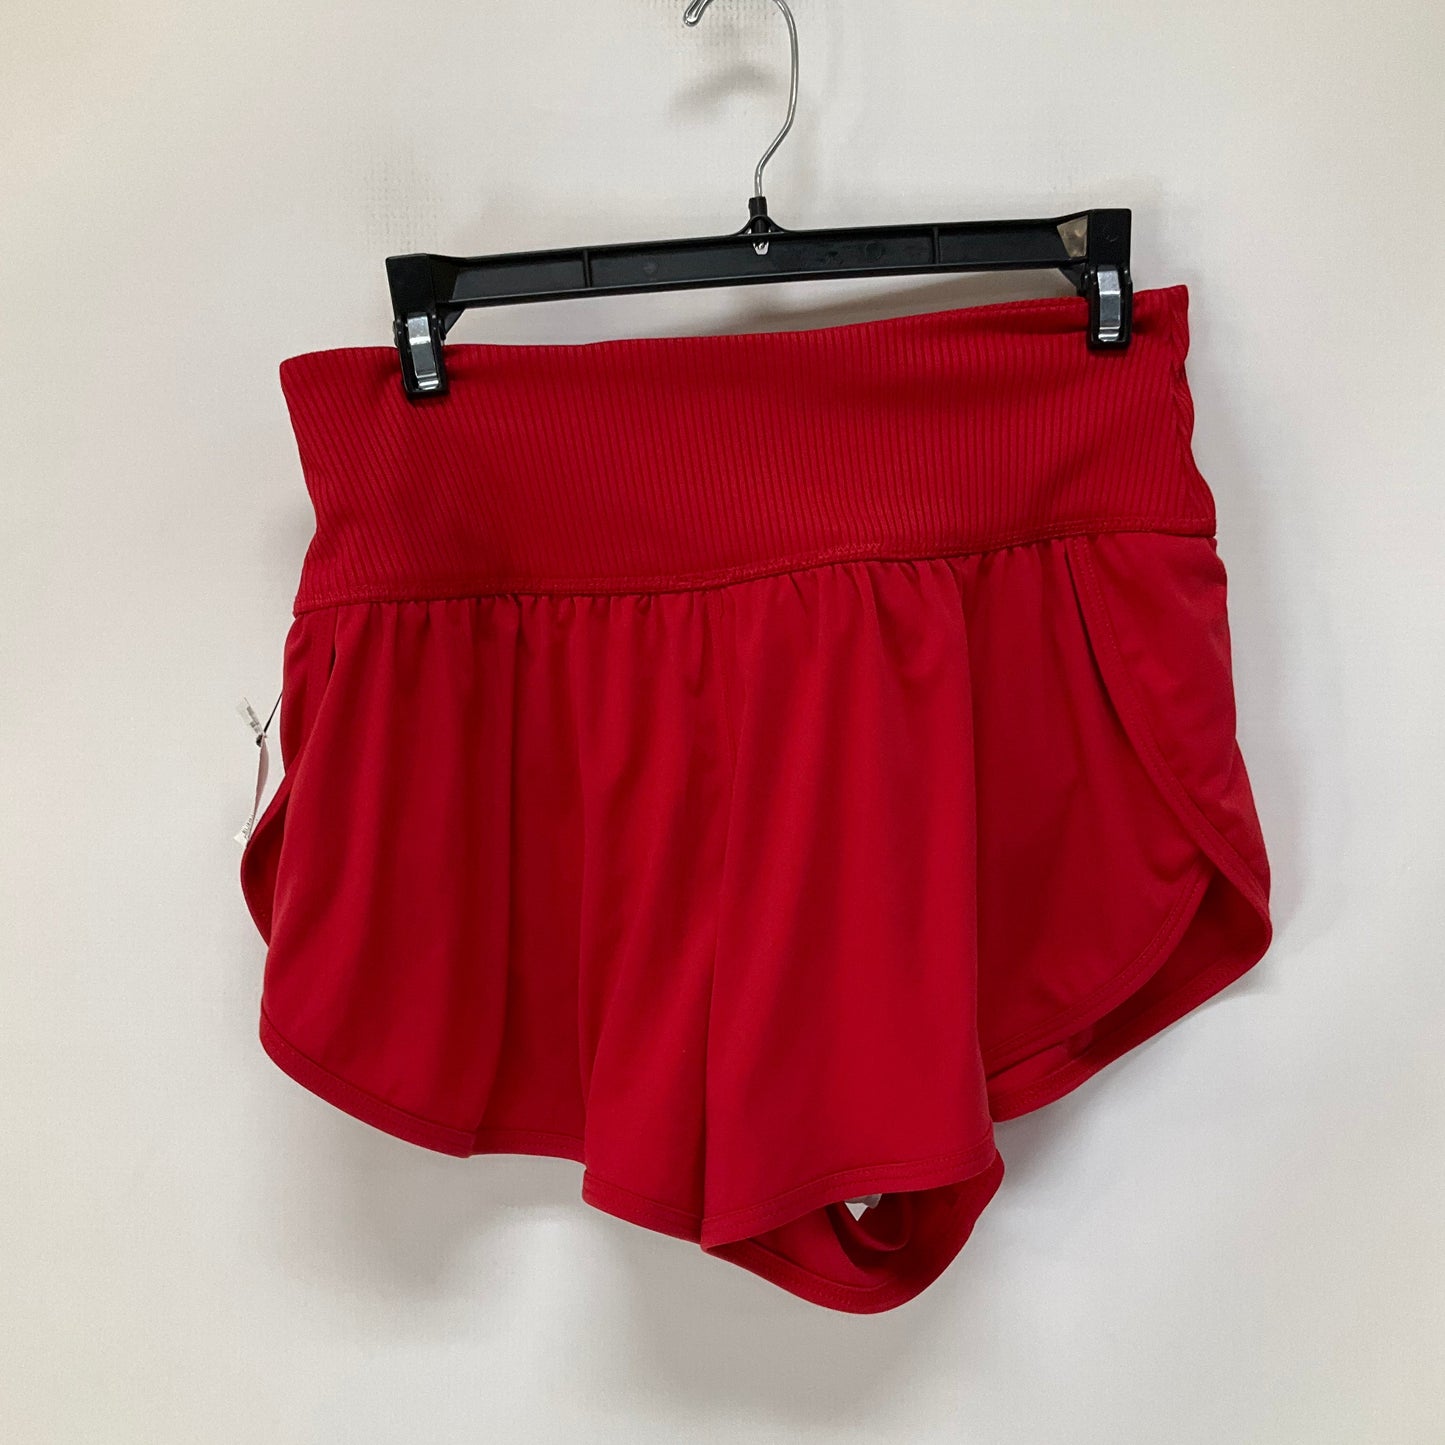 Red Athletic Shorts Free People, Size M